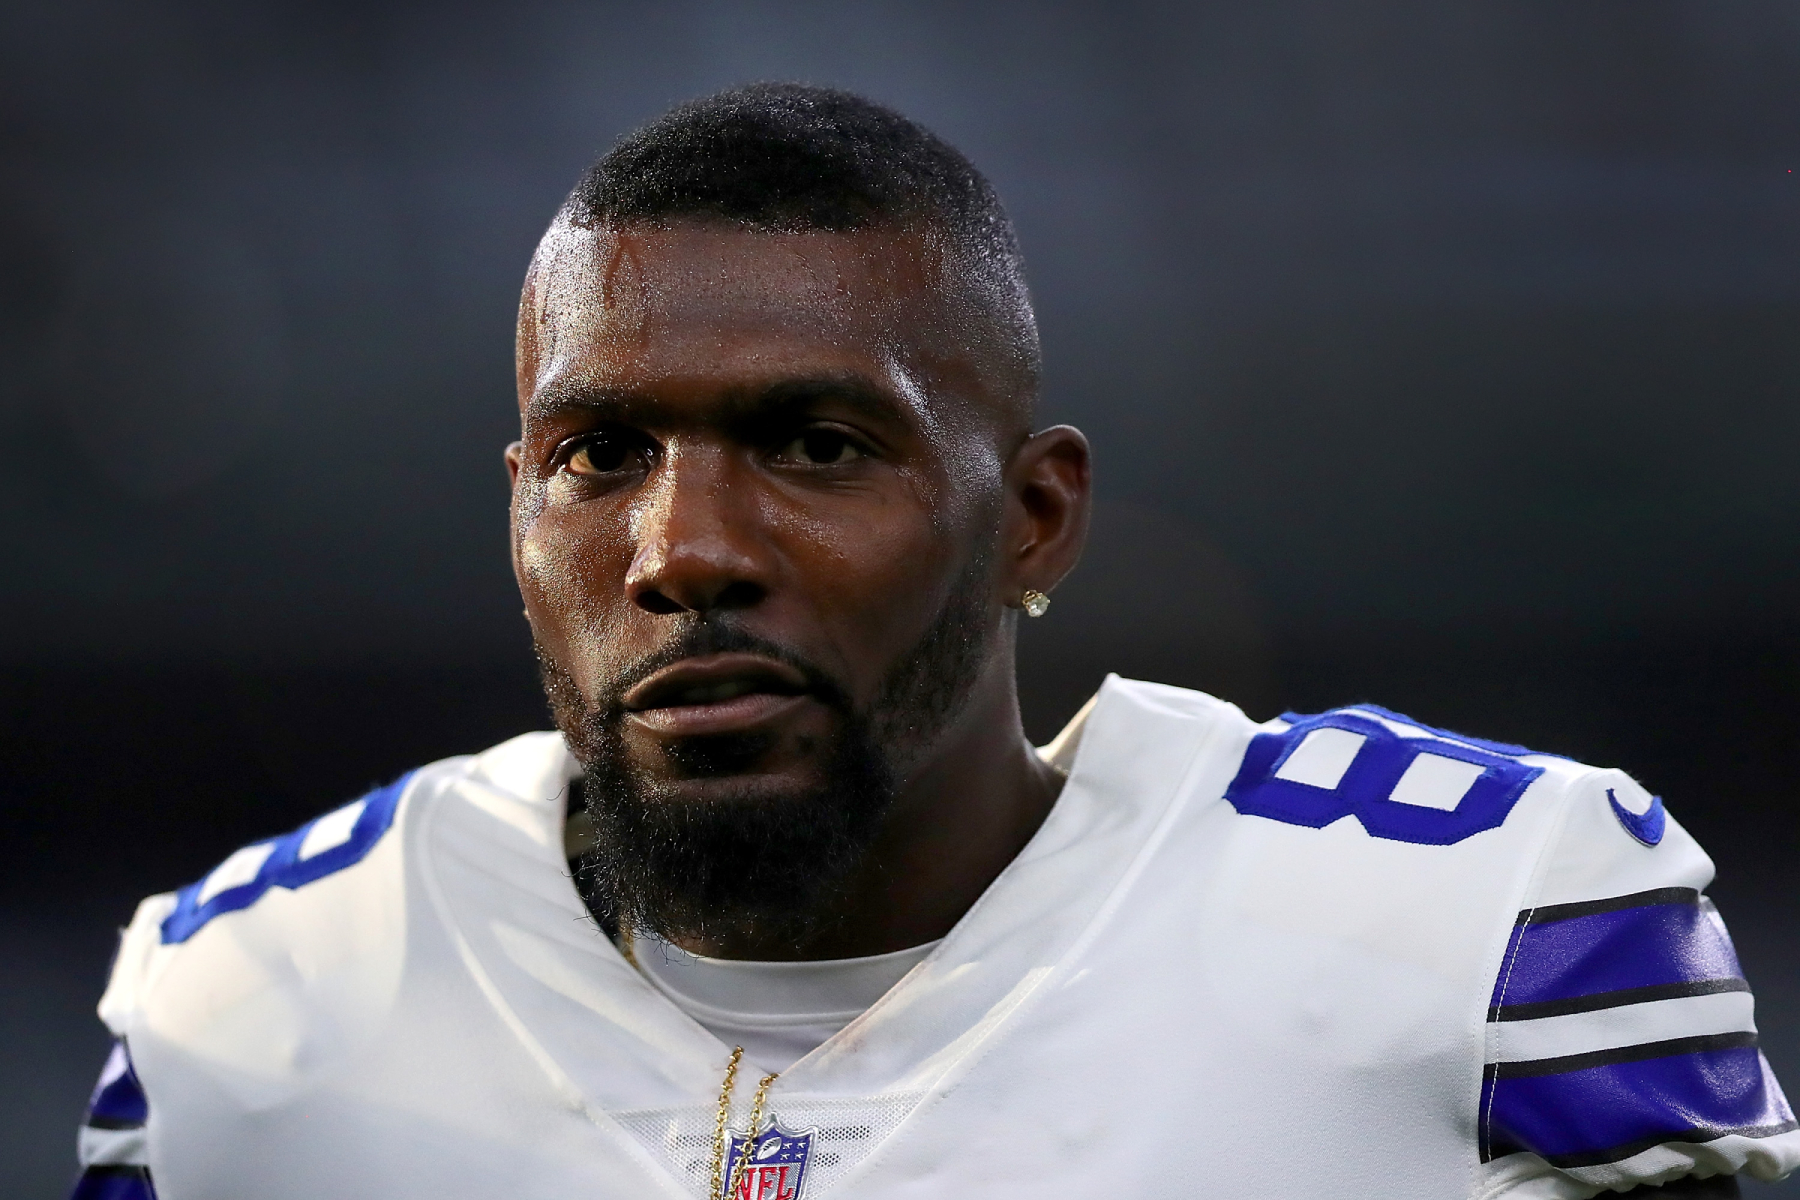 Former Dallas Cowboys wide receiver Dez Bryant no longer plays for the team. He just sent them a message, though, that they need to hear.